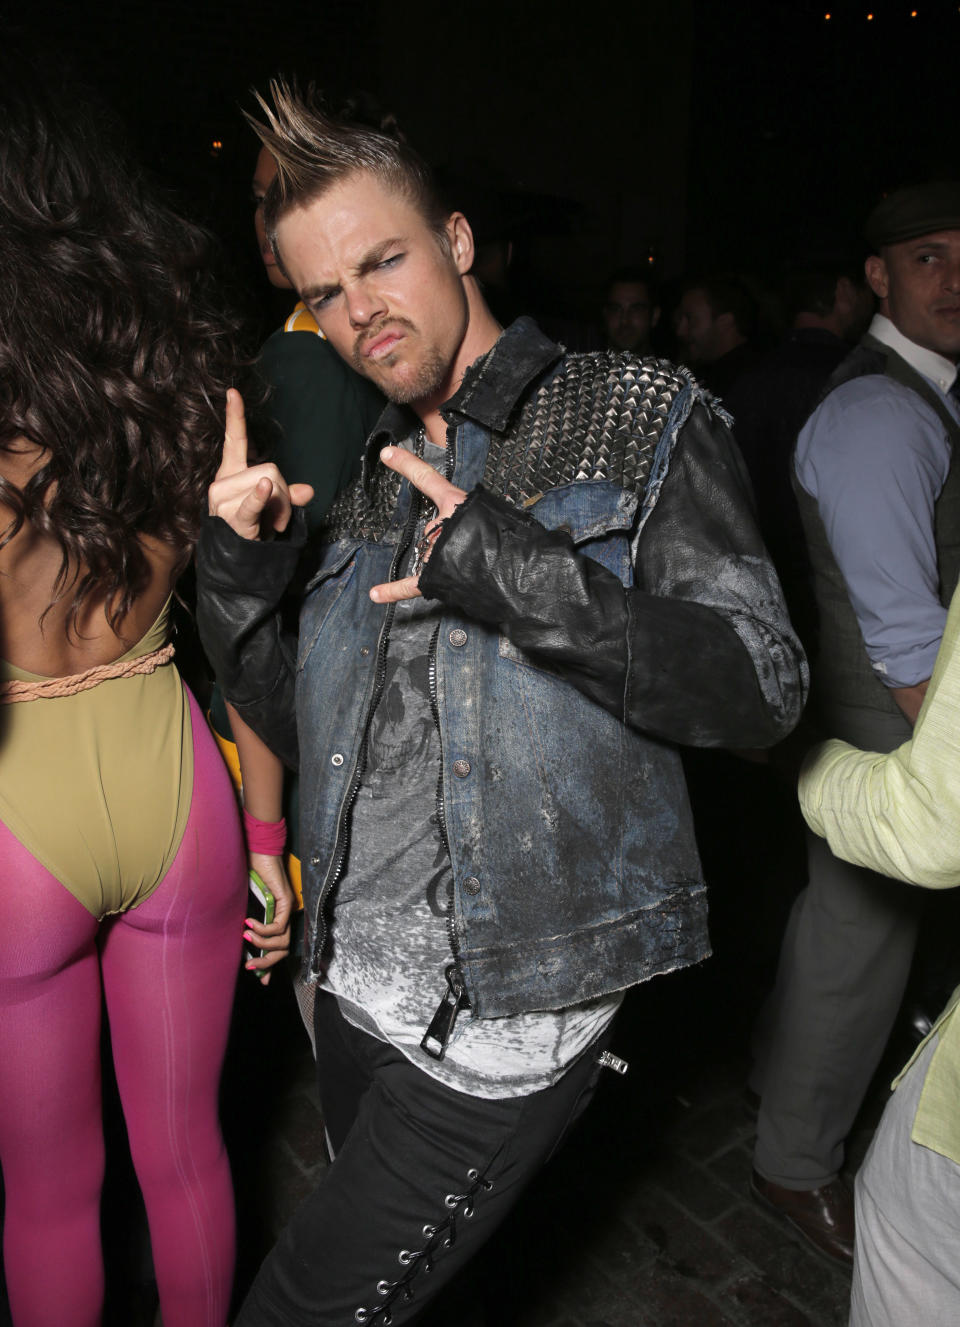 Derek Hough attends Treats! Magazine's 3rd Annual Trick or Treats! Halloween Party presented by Jose Cuervo on Thursday, Oct. 31, 2013 in Los Angeles. (Photo by Todd Williamson/Invision for Jose Cuervo/AP Images)